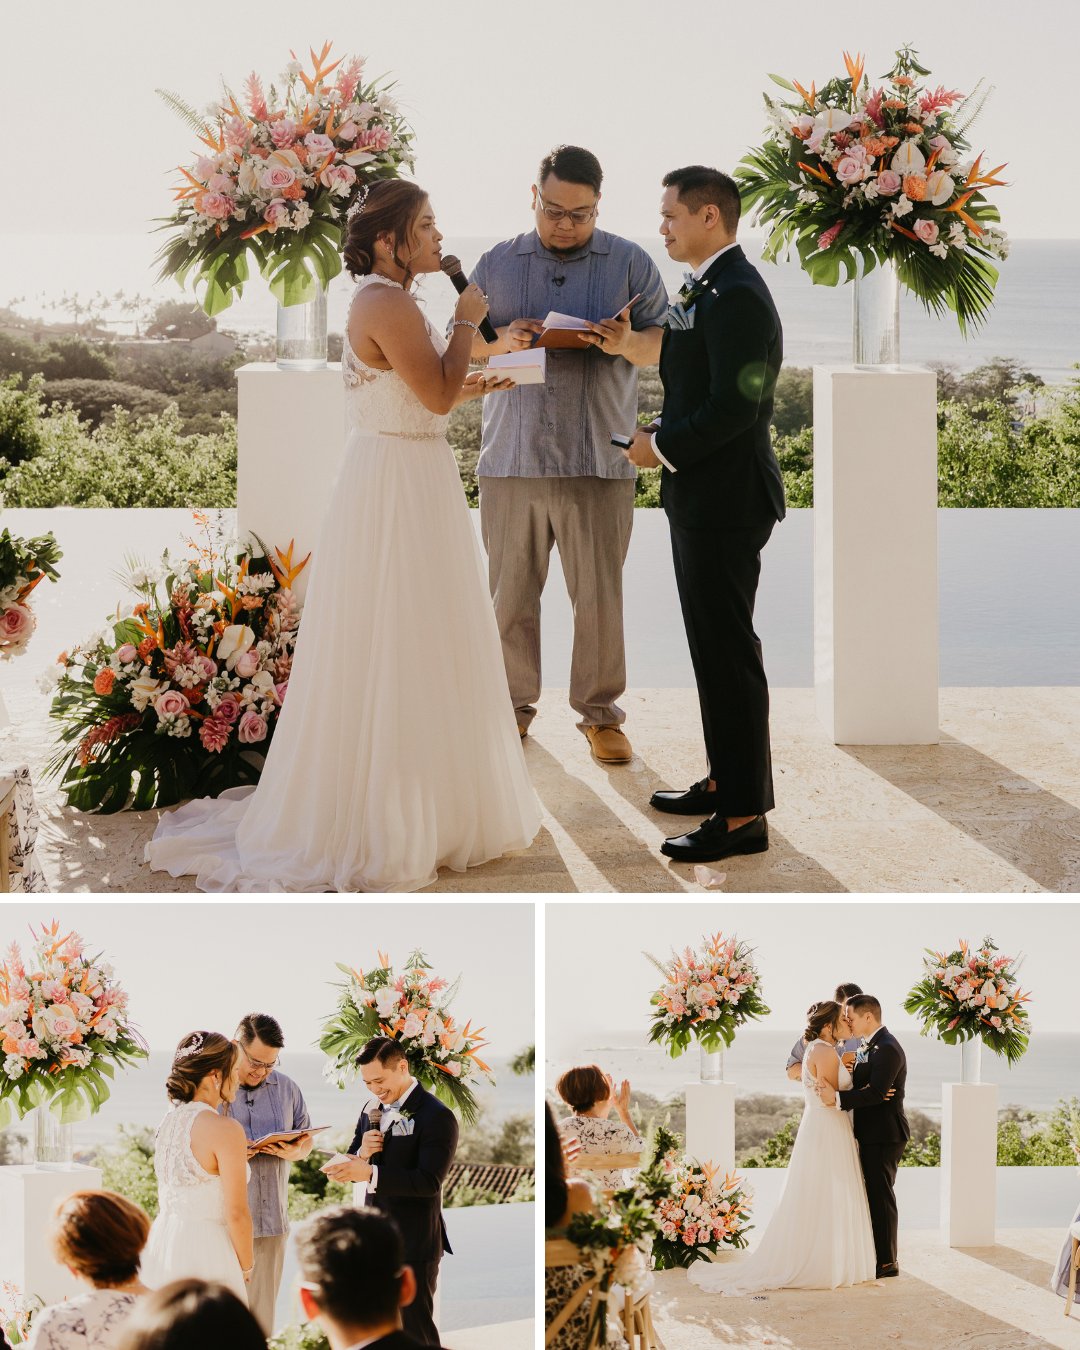 A bride and groom stand at an outdoor altar covered in pink and orange flowers with an ocean view in the background. The couple holds hands as a man officiates. Bottom images show the couple exchanging vows and kissing, with guests seated and watching.